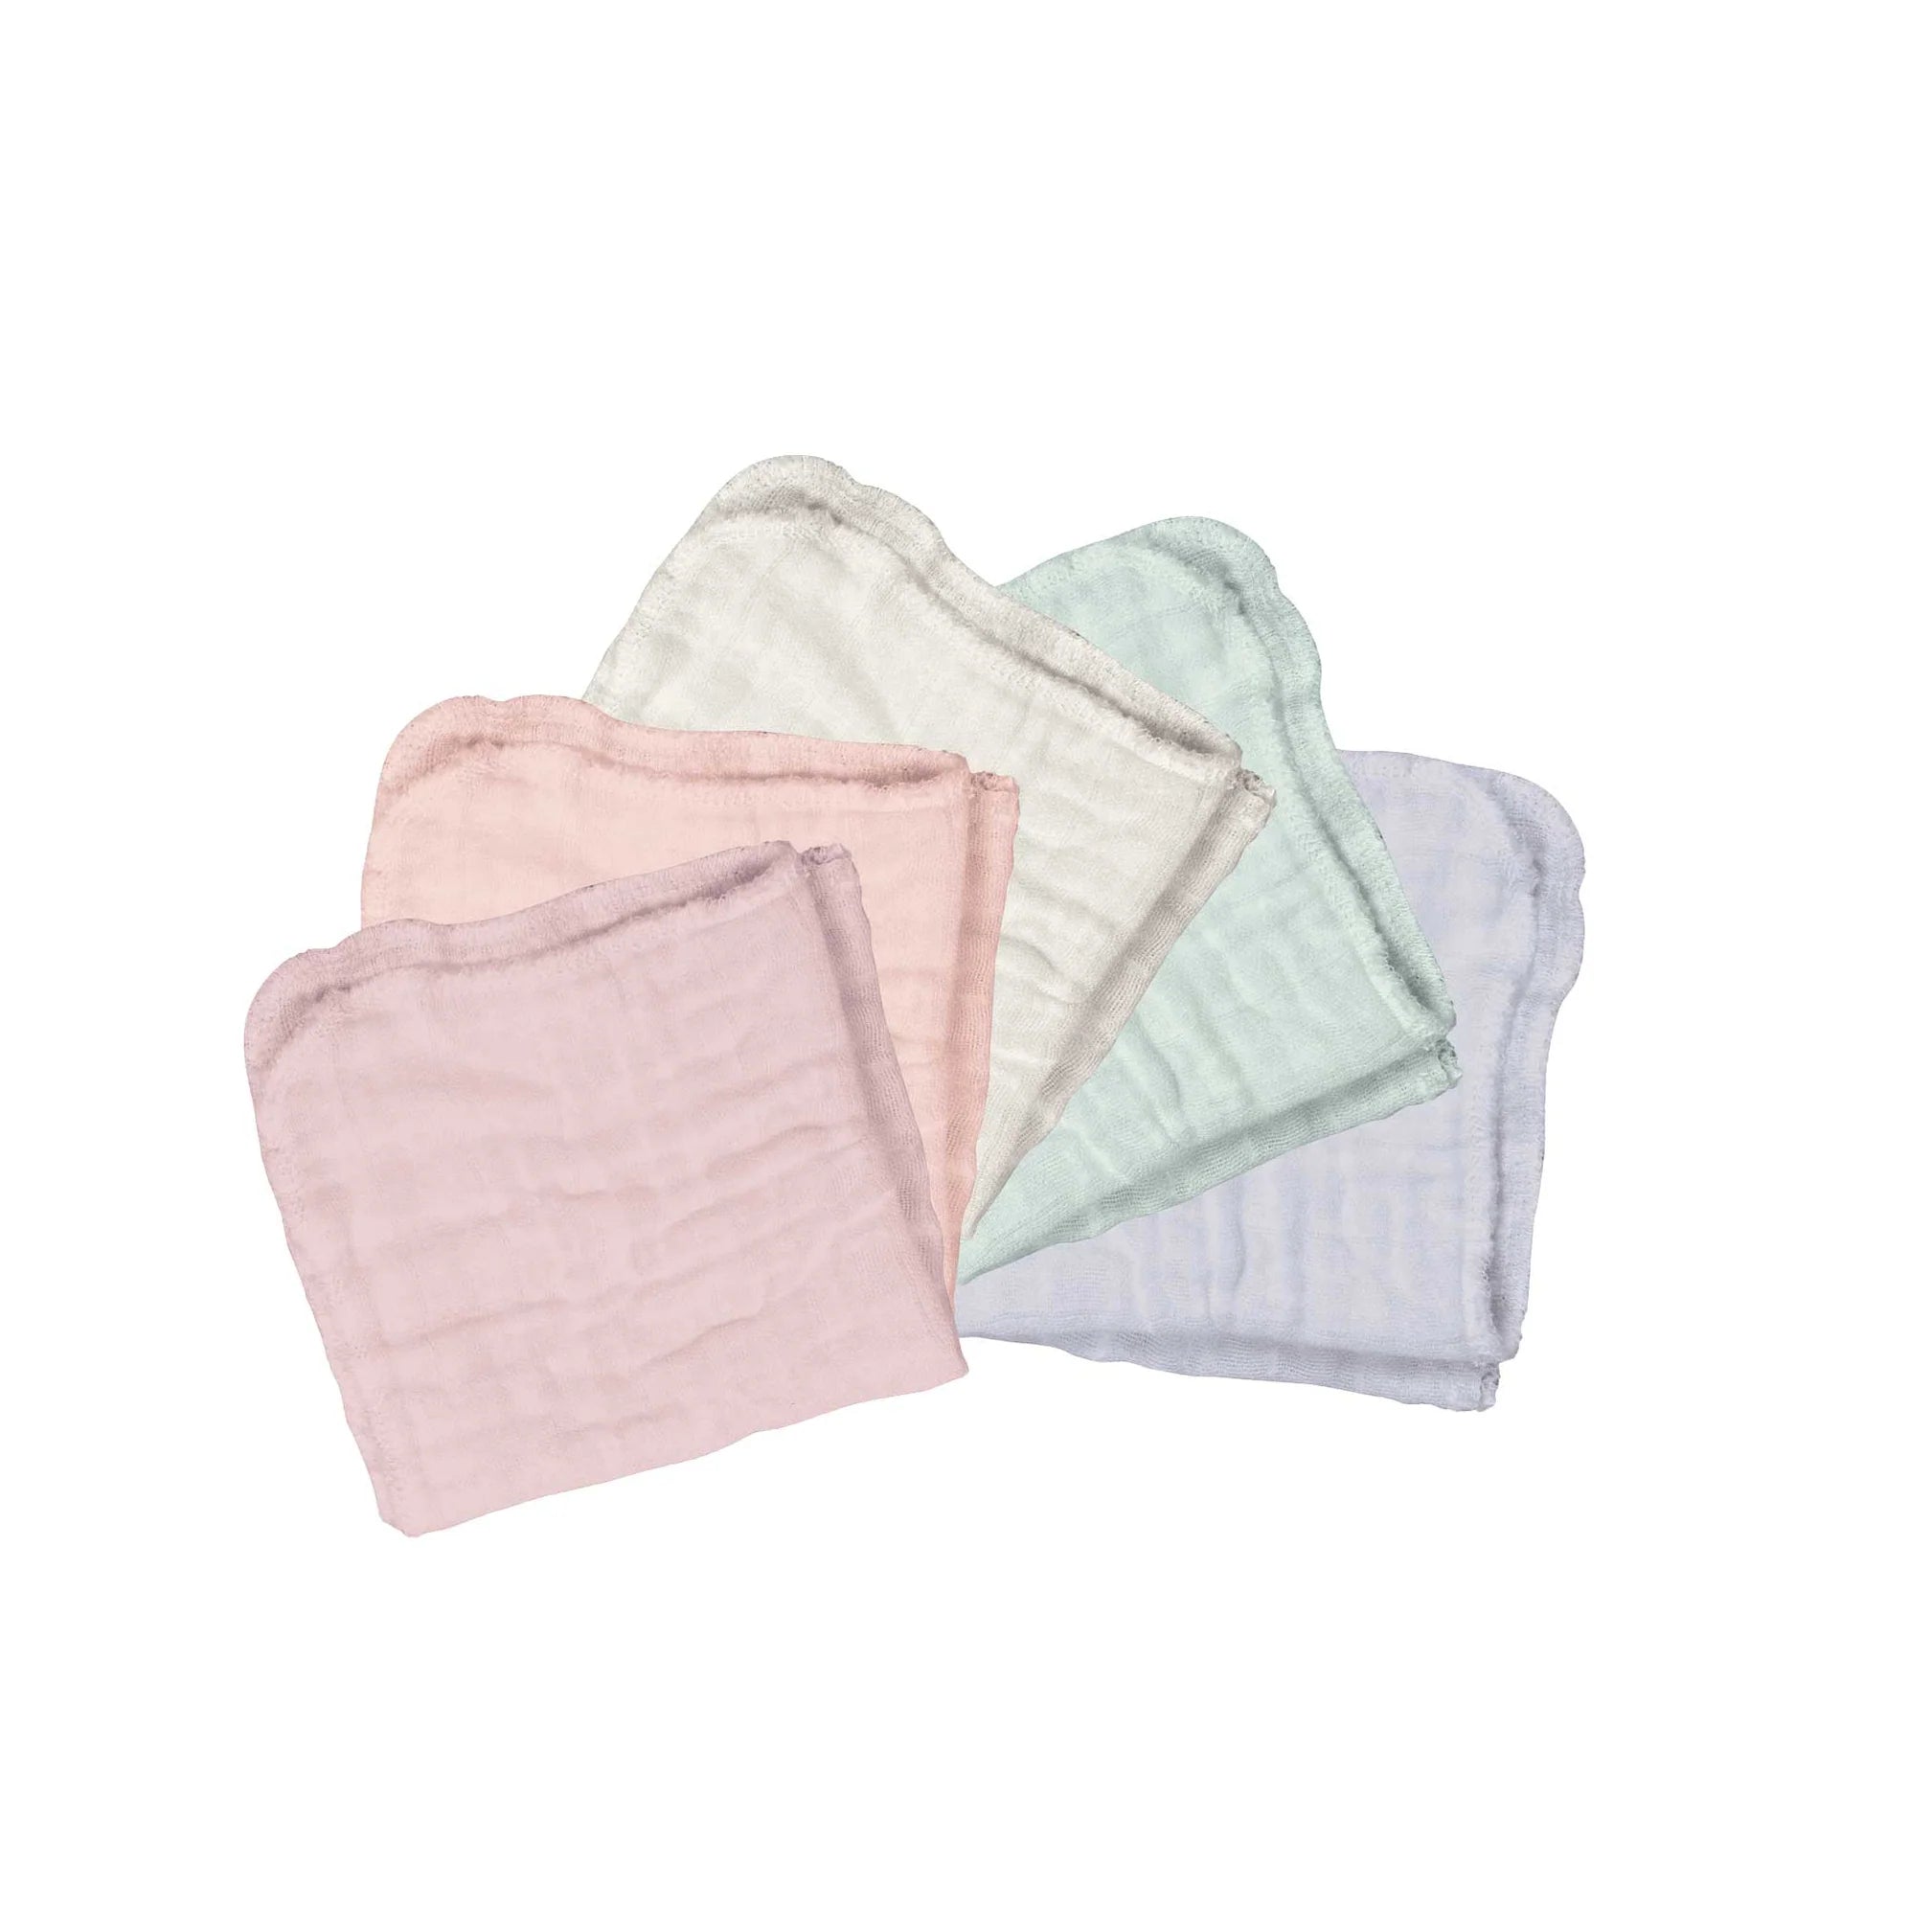 Green Sprouts Organic Cotton Muslin Cloths (5 Pack) - Rose Set-Green Sprouts-Little Giant Kidz